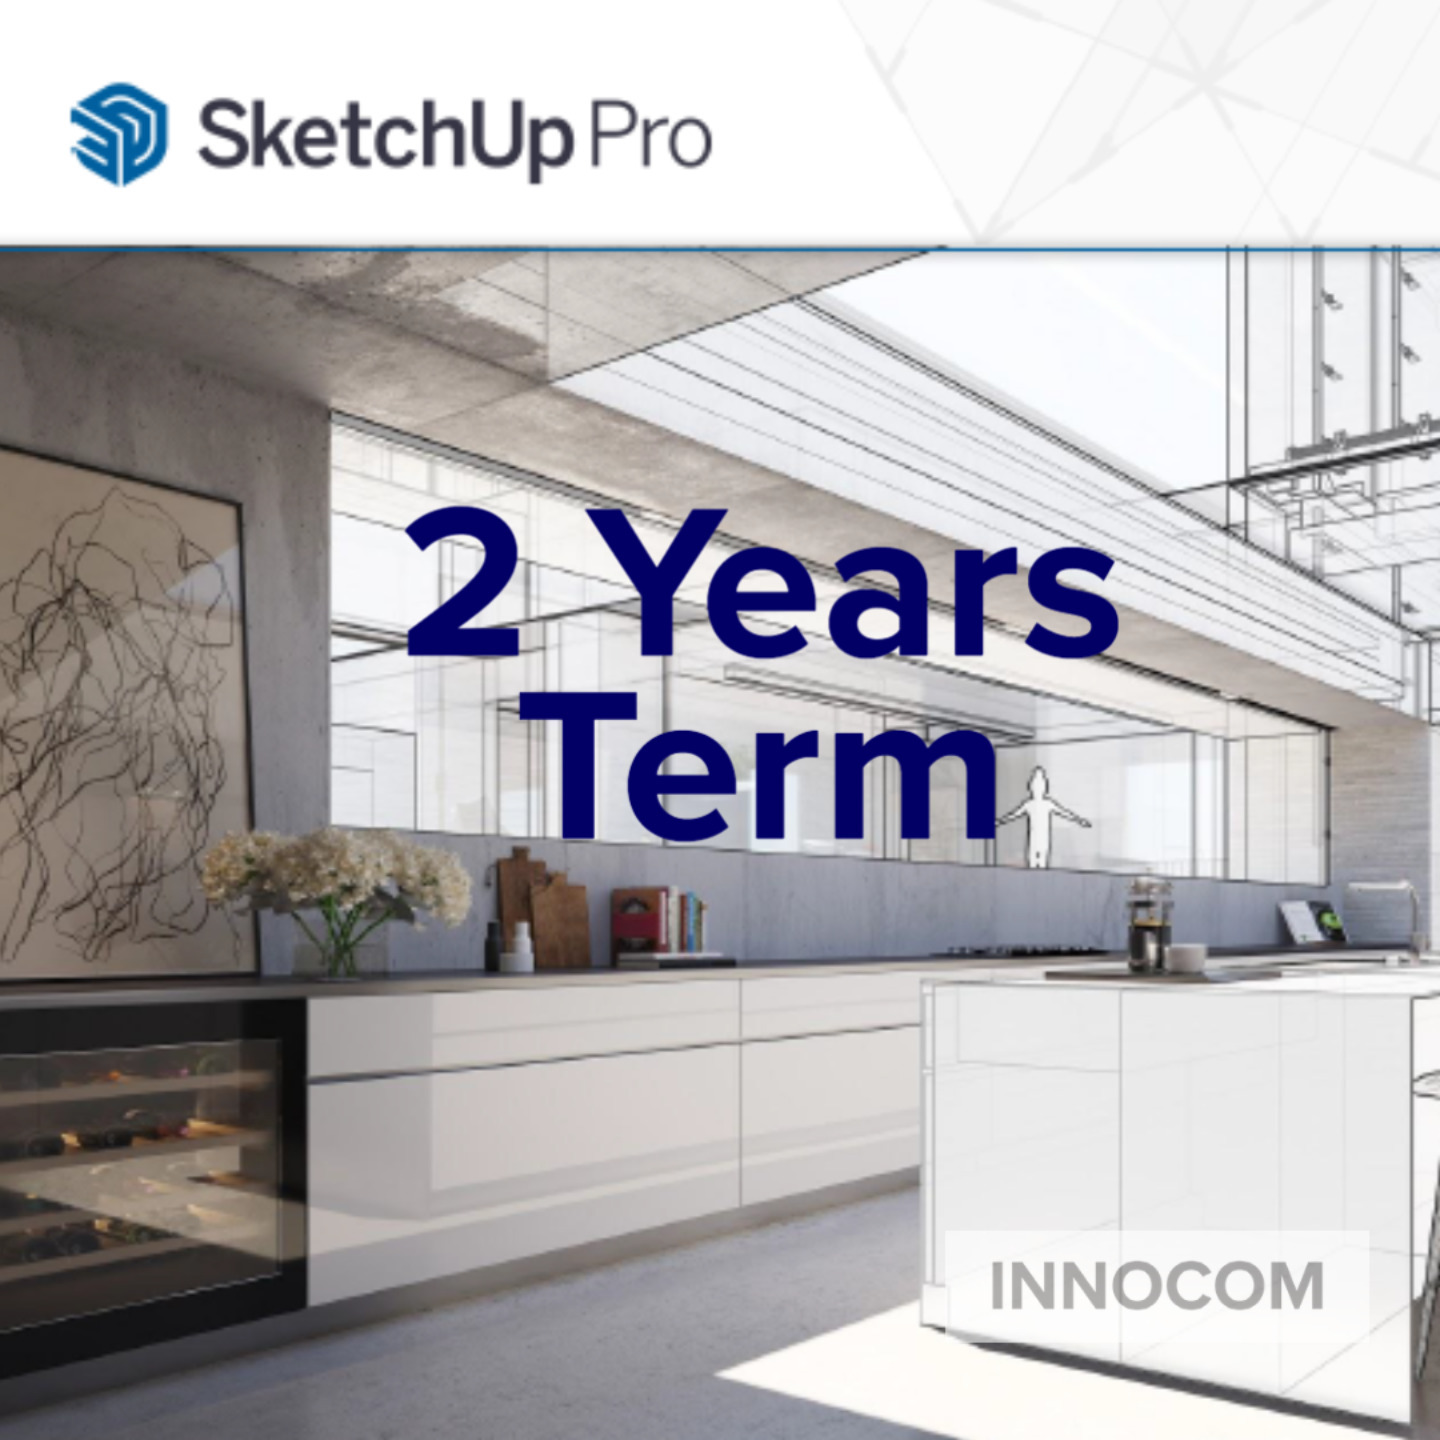 SketchUp Pro 2023-Annual (2 Years Term)